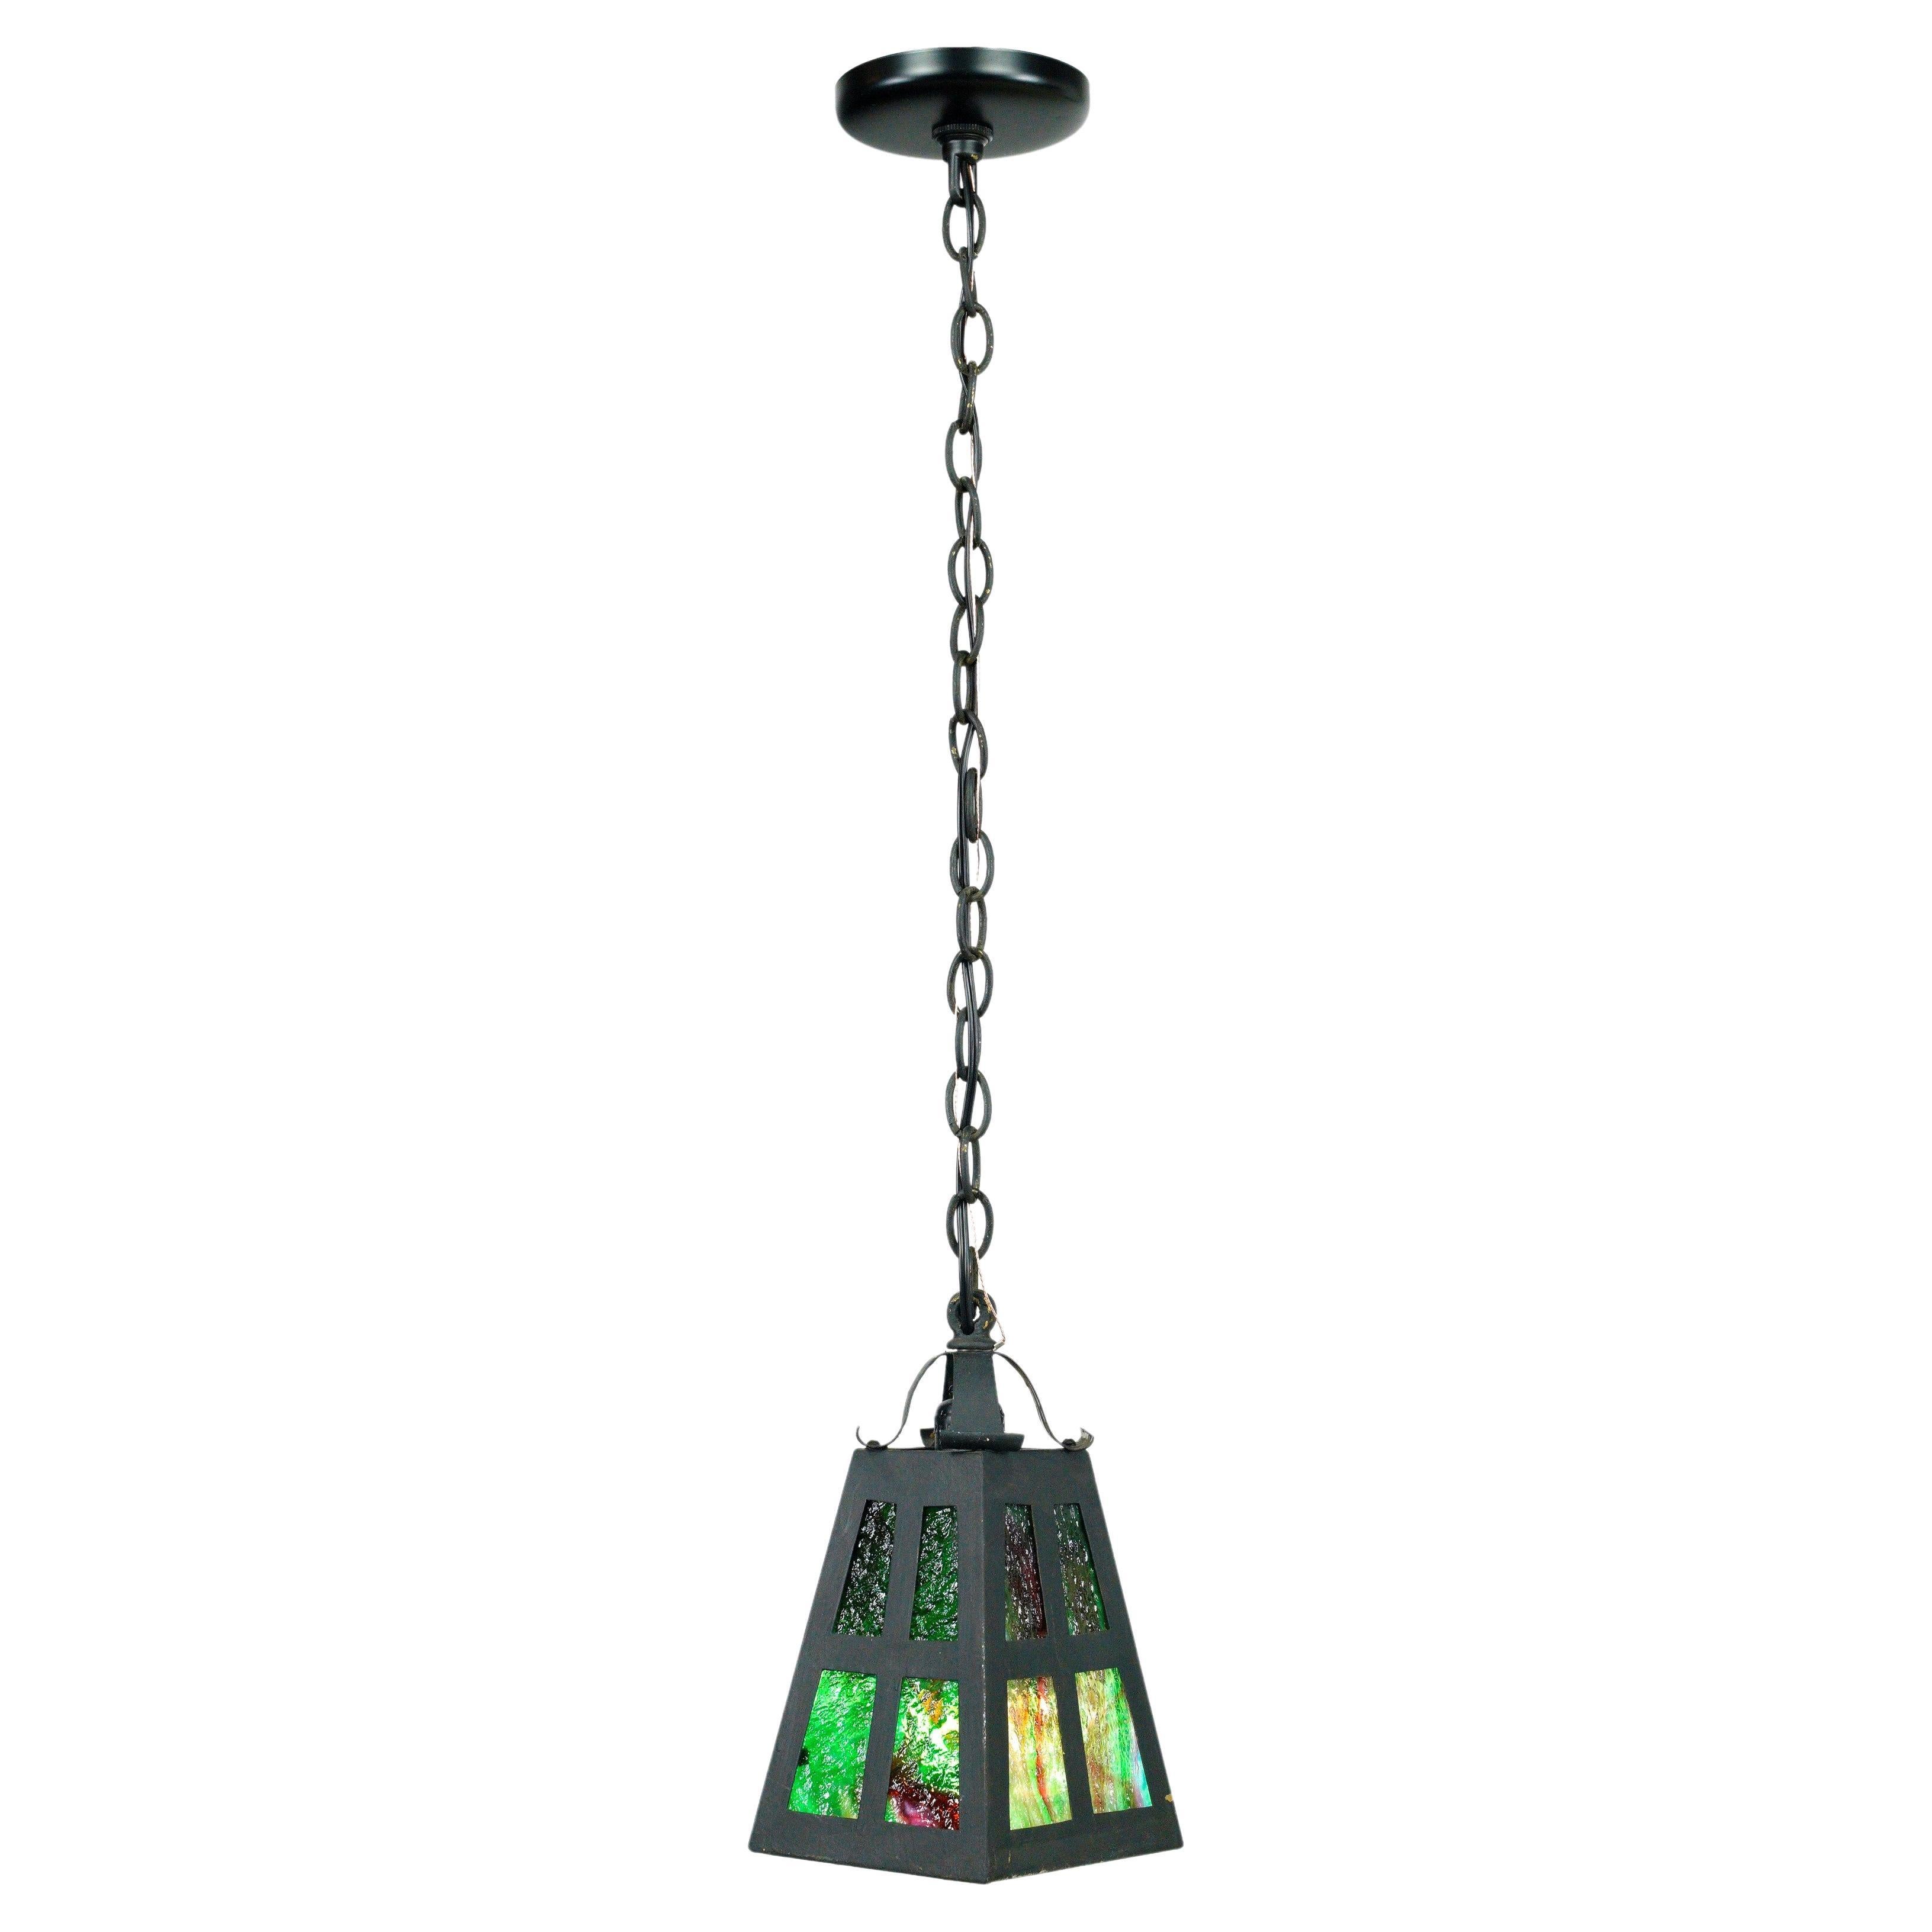 1920s Arts & Crafts Stained Glass Lantern Pendant Light For Sale